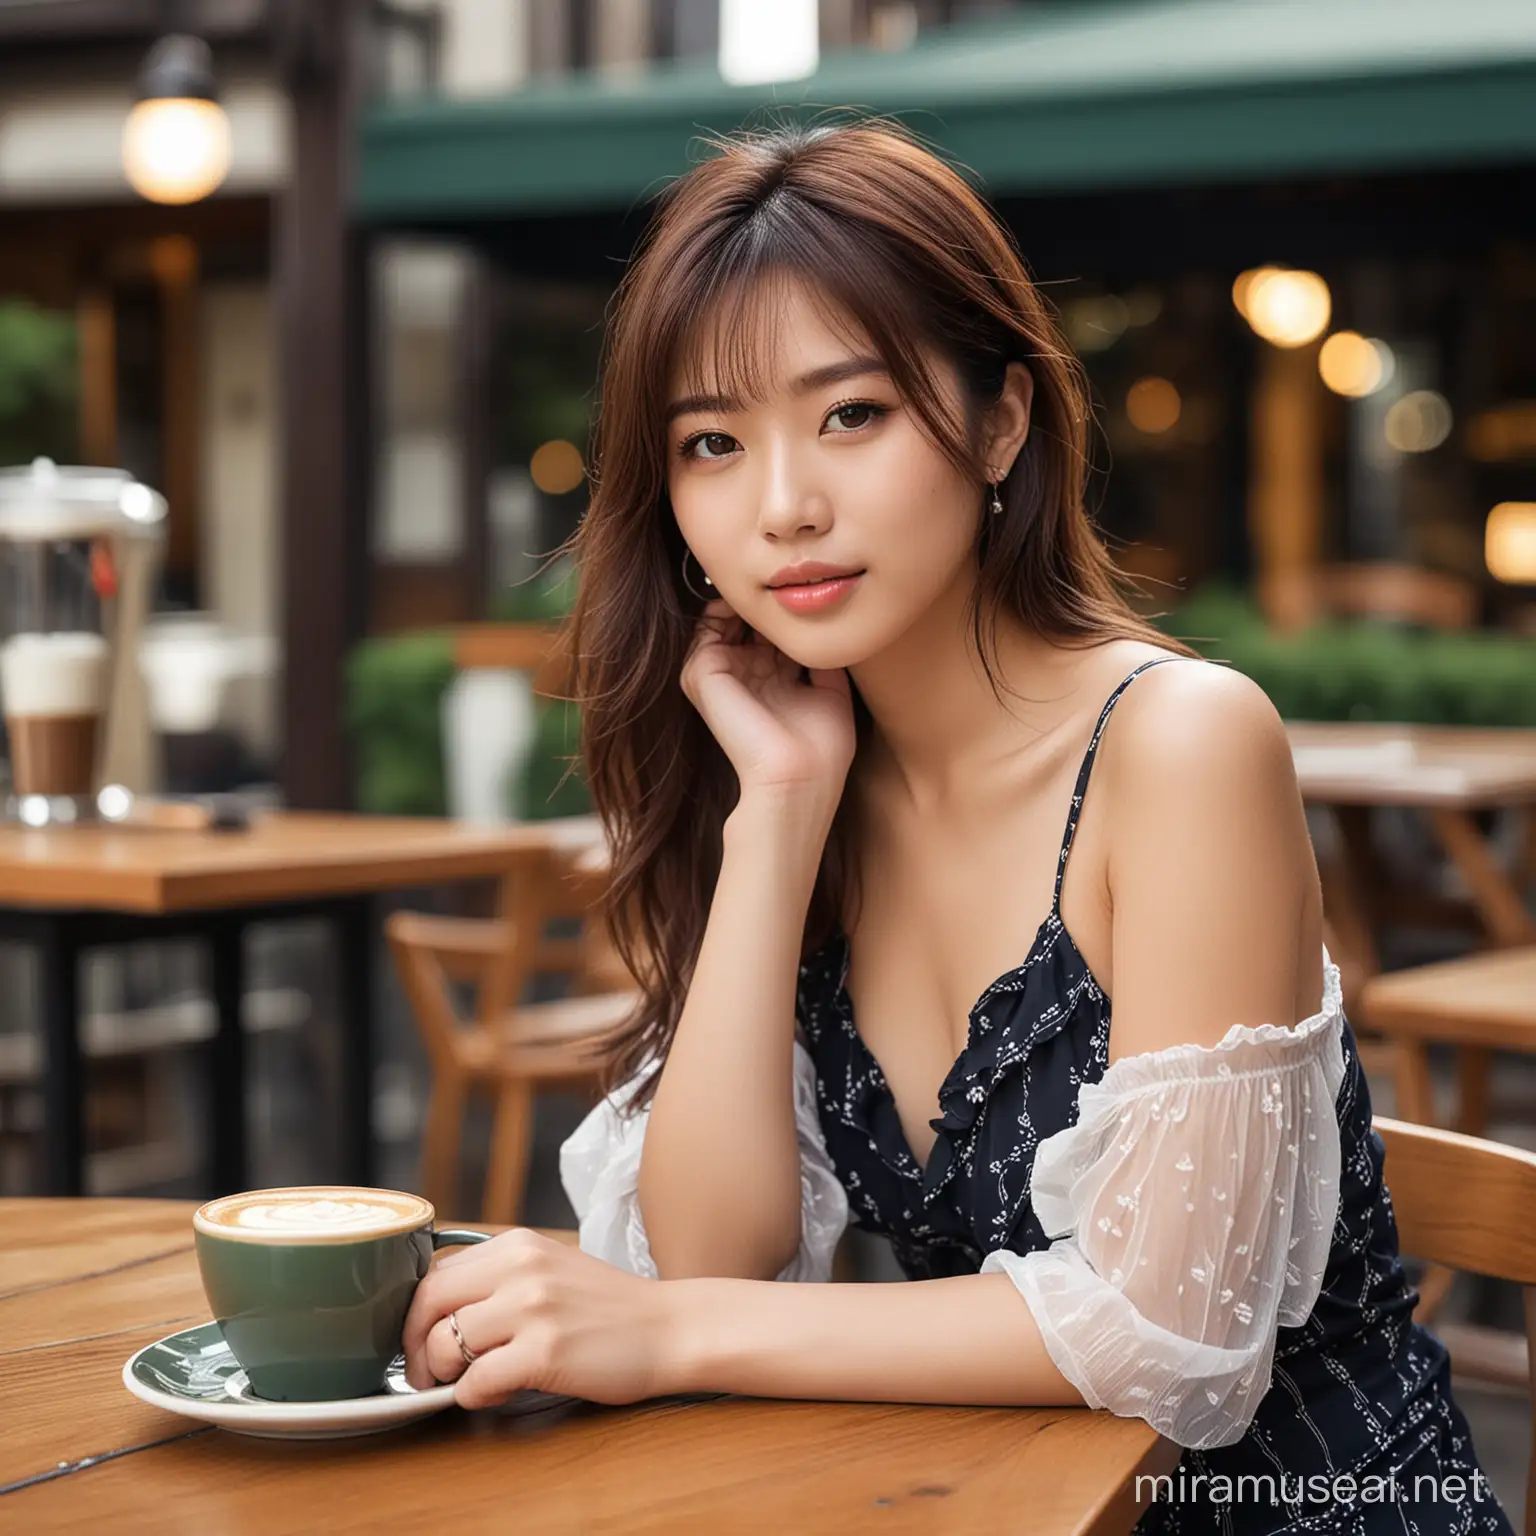 Stylish Japanese Model Girl Relaxing Outside Coffee Shop with Leica 50mm Lens Bokeh